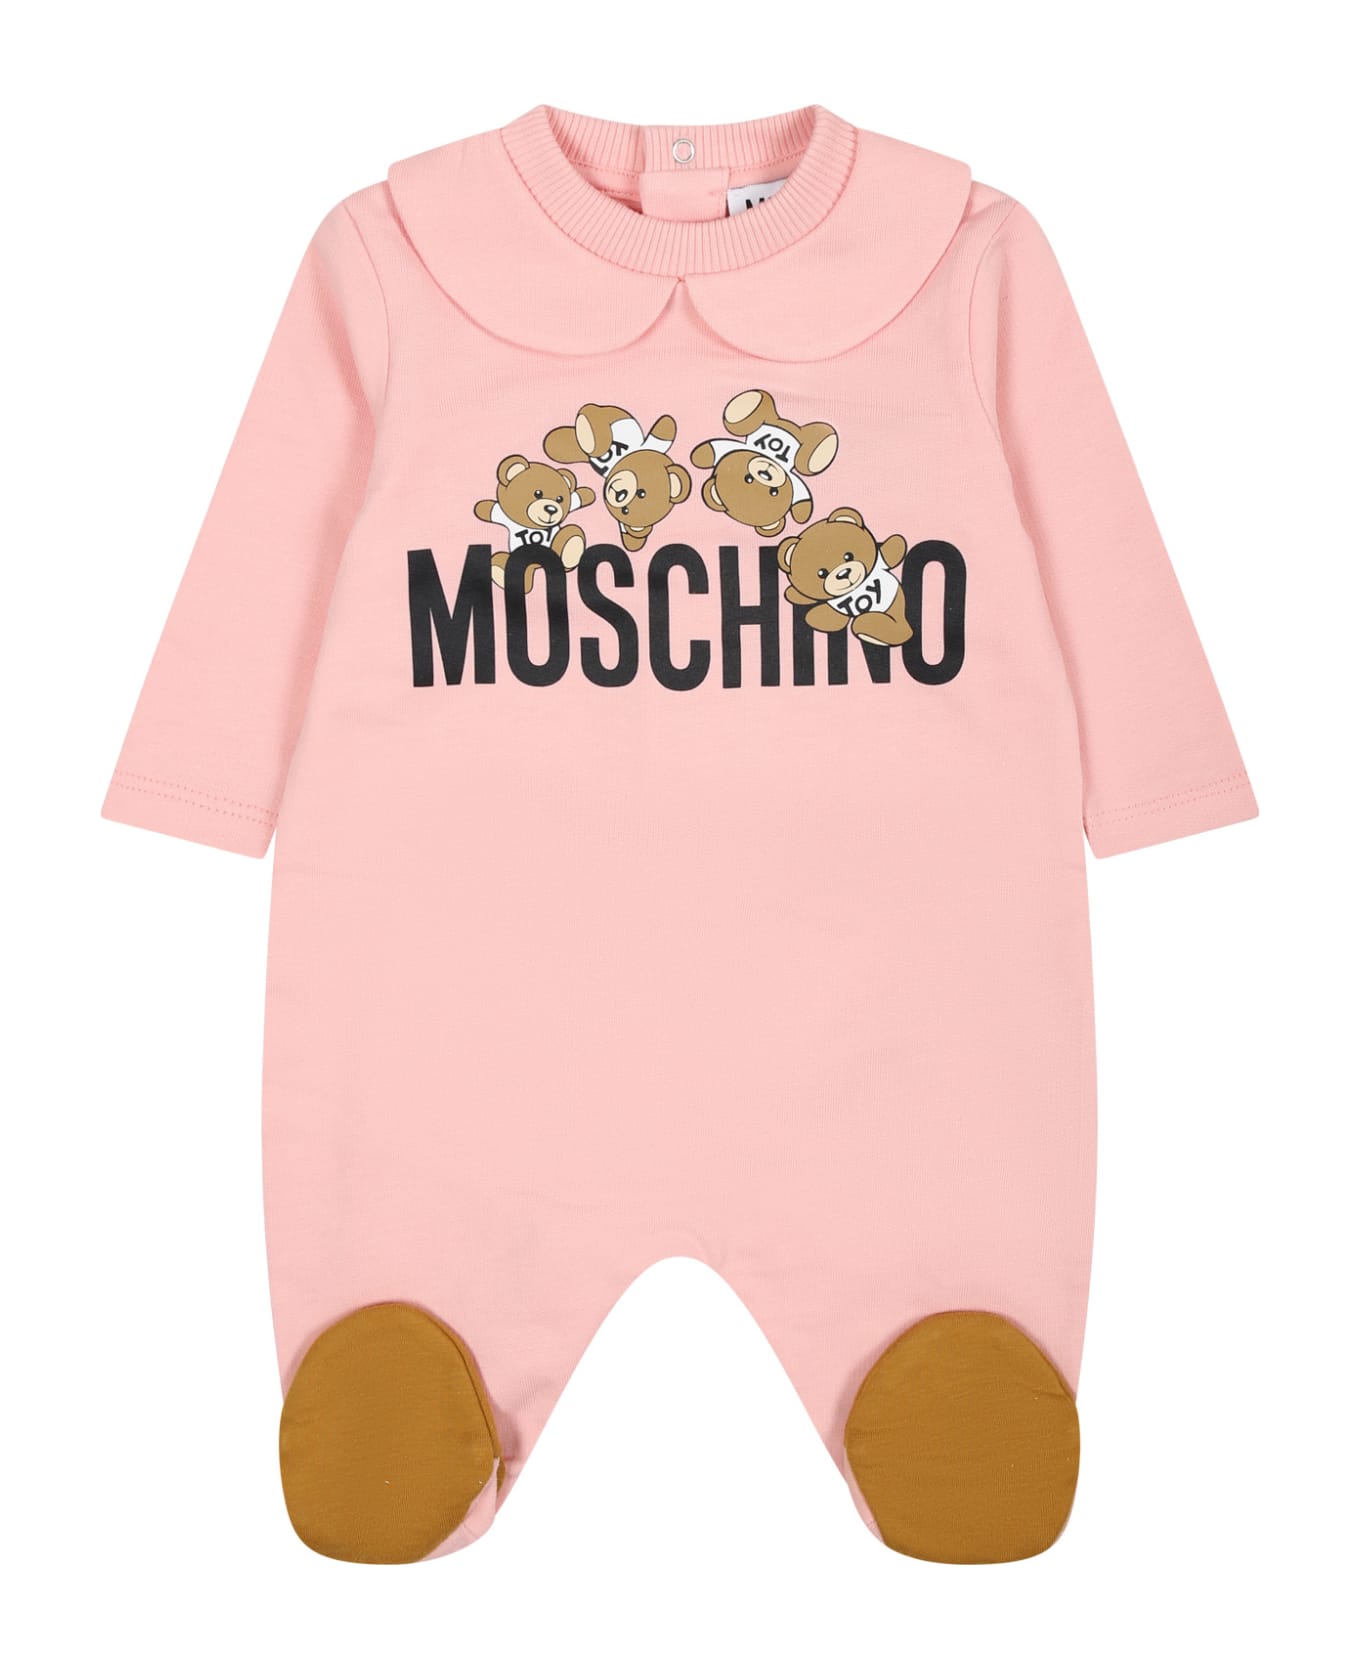 Moschino Pink Jumpsuit For Baby Girl With Logo And Teddy Bear - Pink